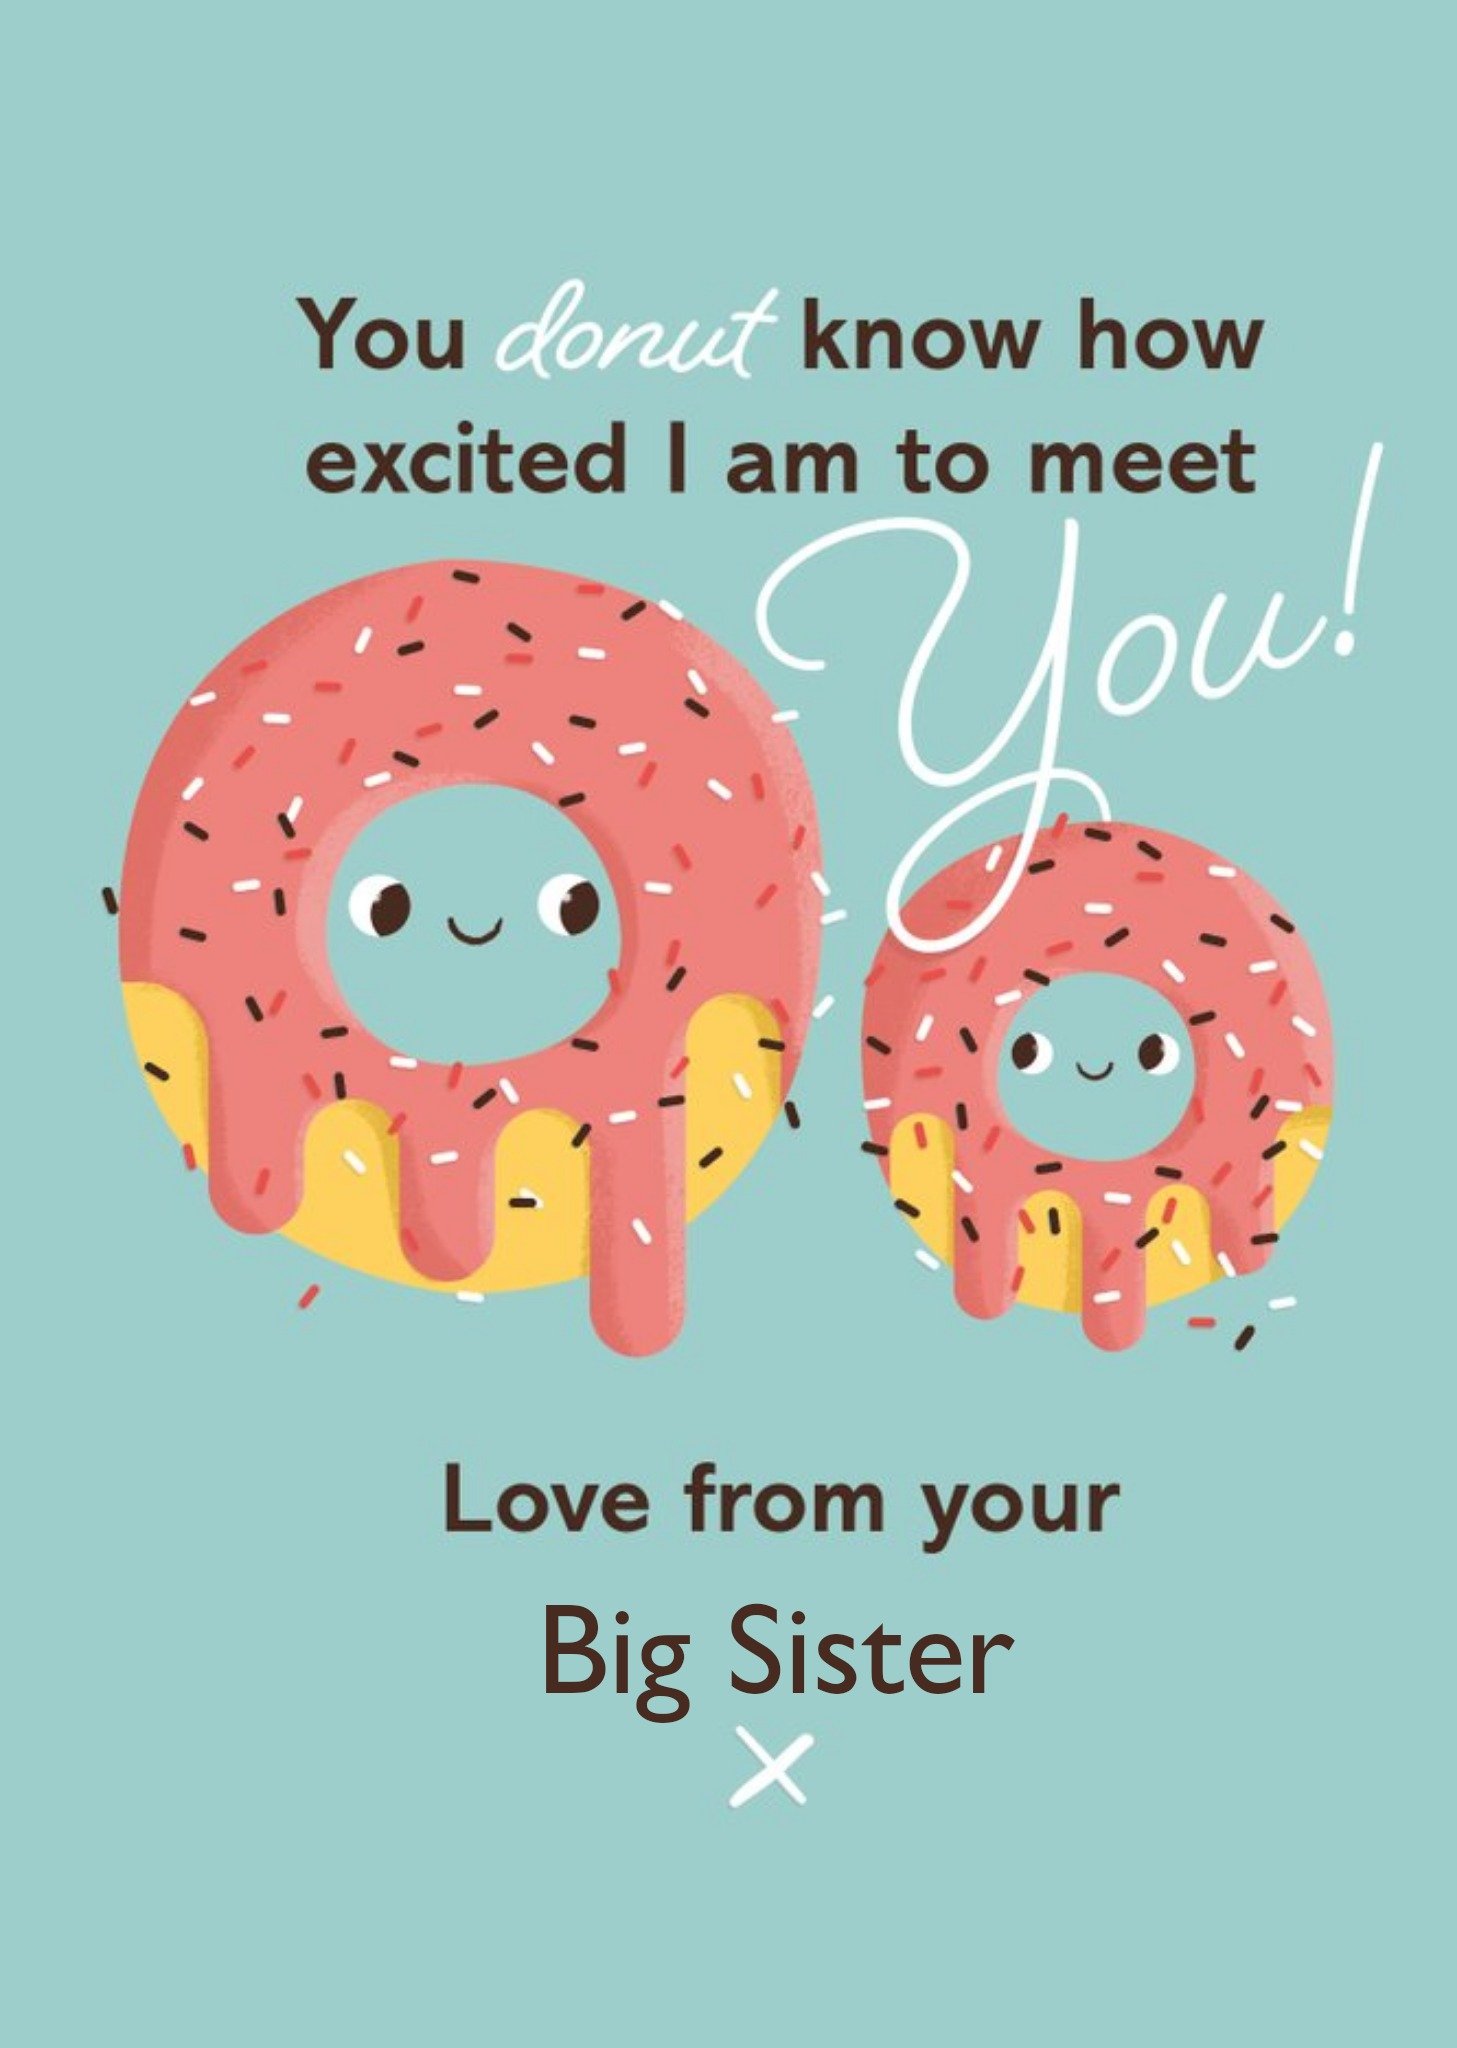 Moonpig Bright Fun Illustration Of Two Donuts You Donut Know How Excited I Am To Meet You New Baby C